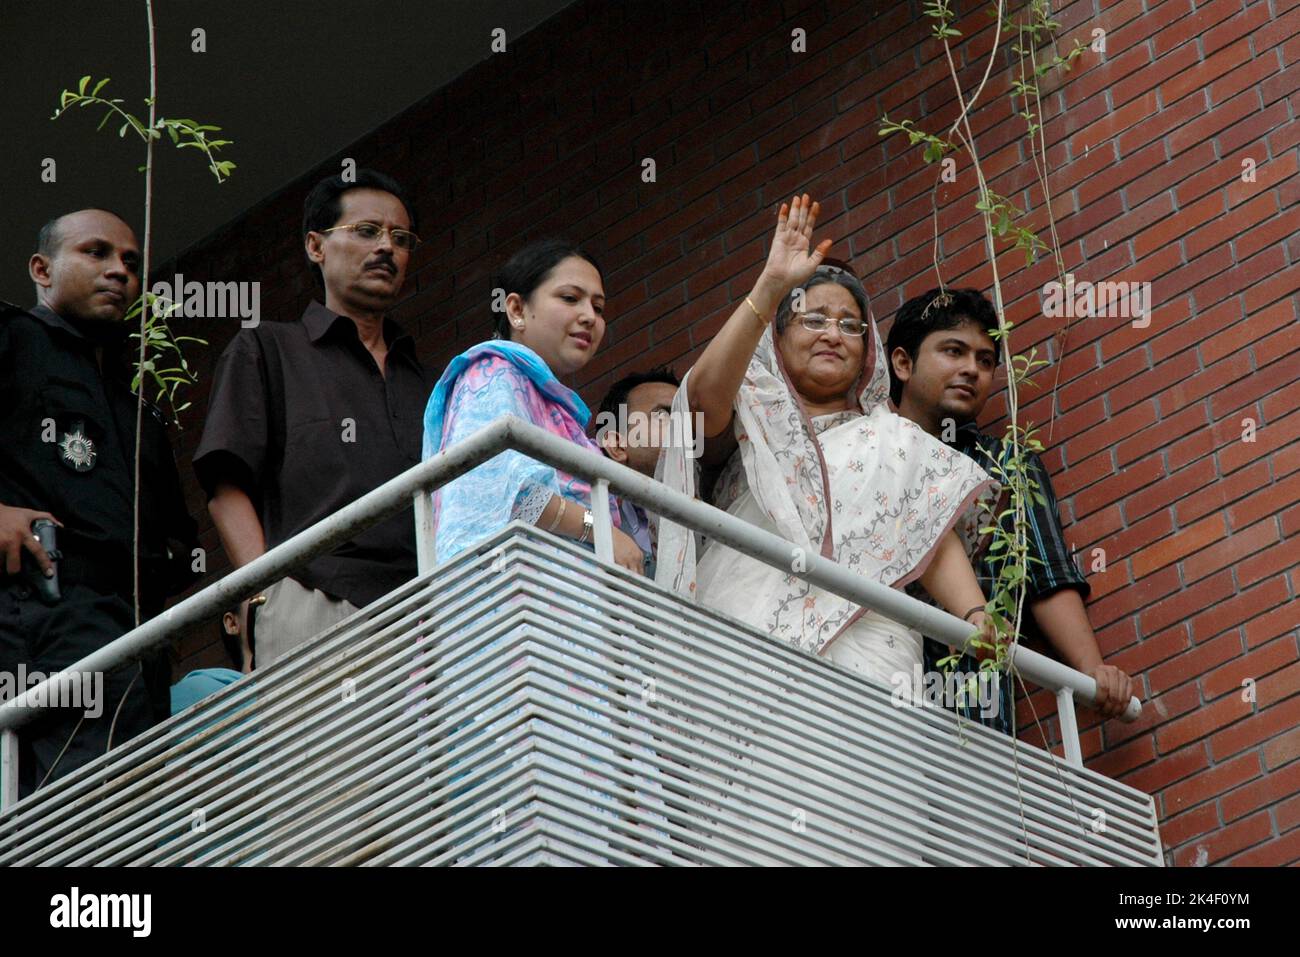 Dhaka, Bangladesh - June 11, 2008: Former Prime Minister Sheikh Hasina was released on bail and went straight from Sub jail to the Bangabandhu Memoria Stock Photo